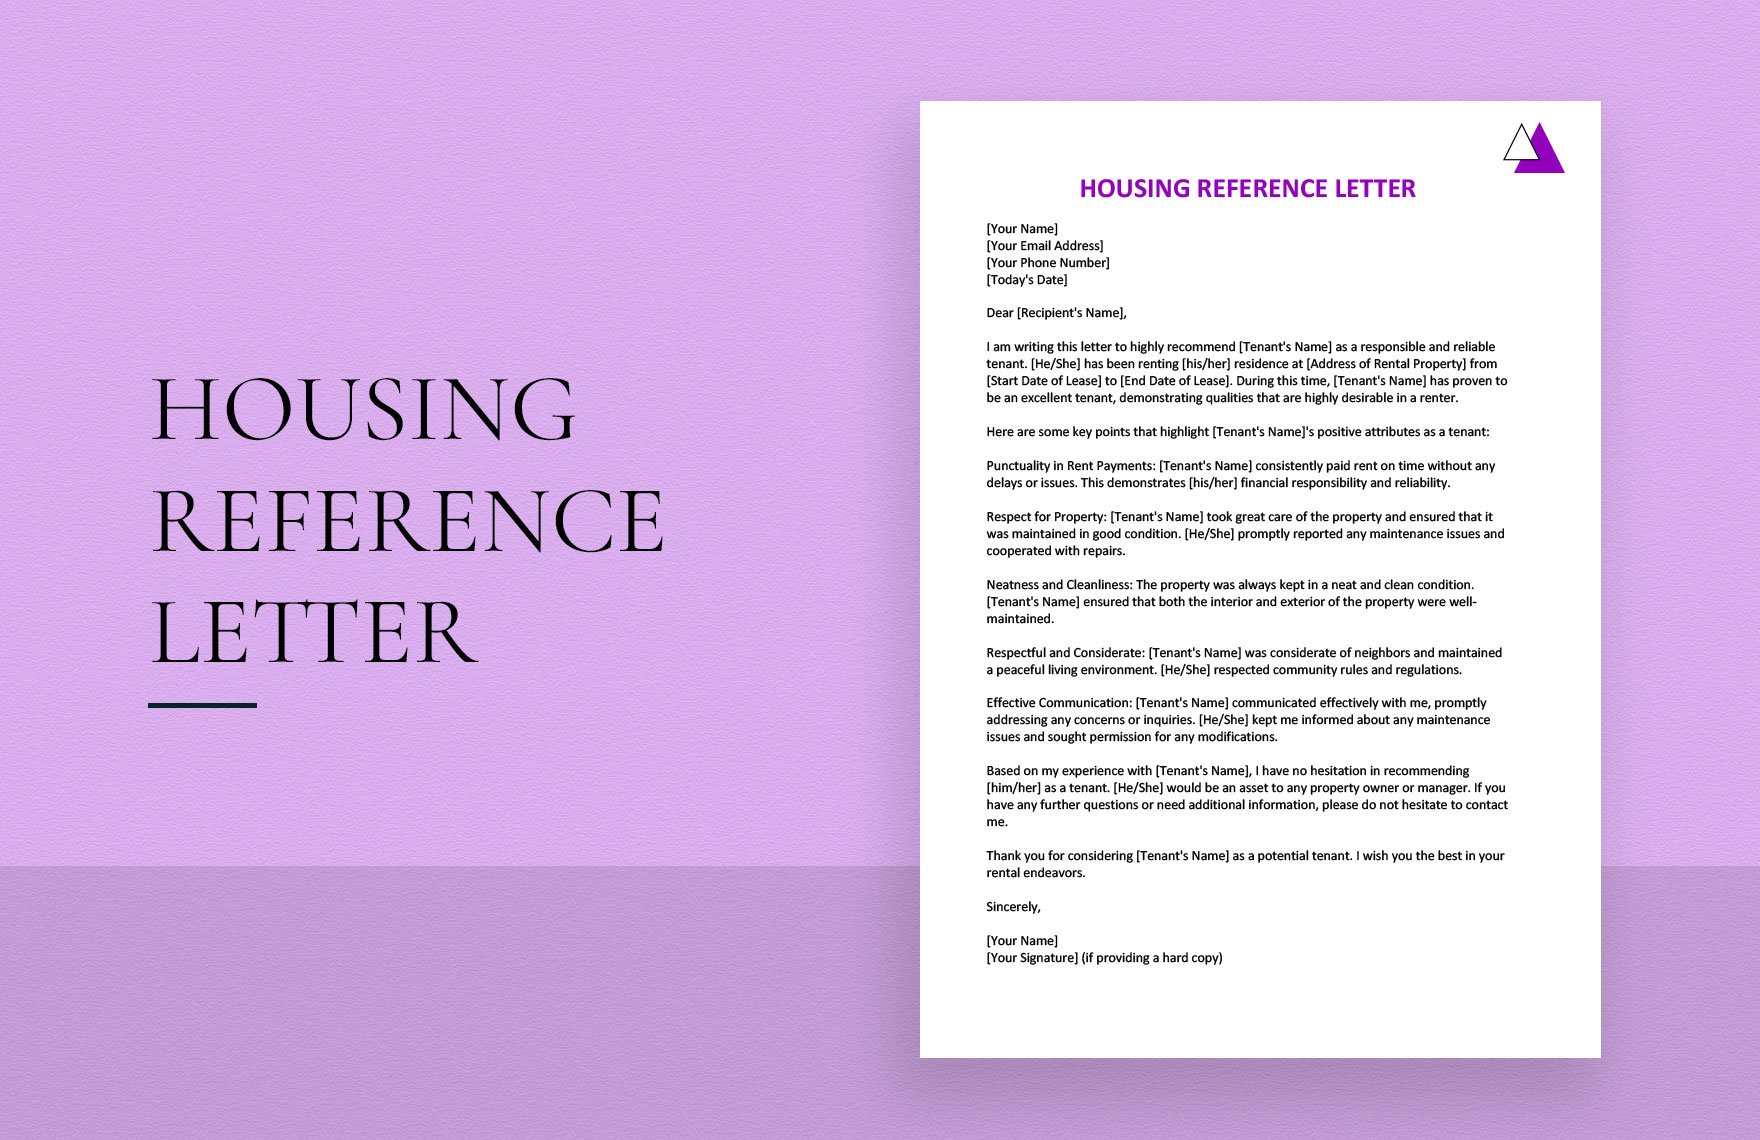 Free Housing Reference Letter in Word, Google Docs